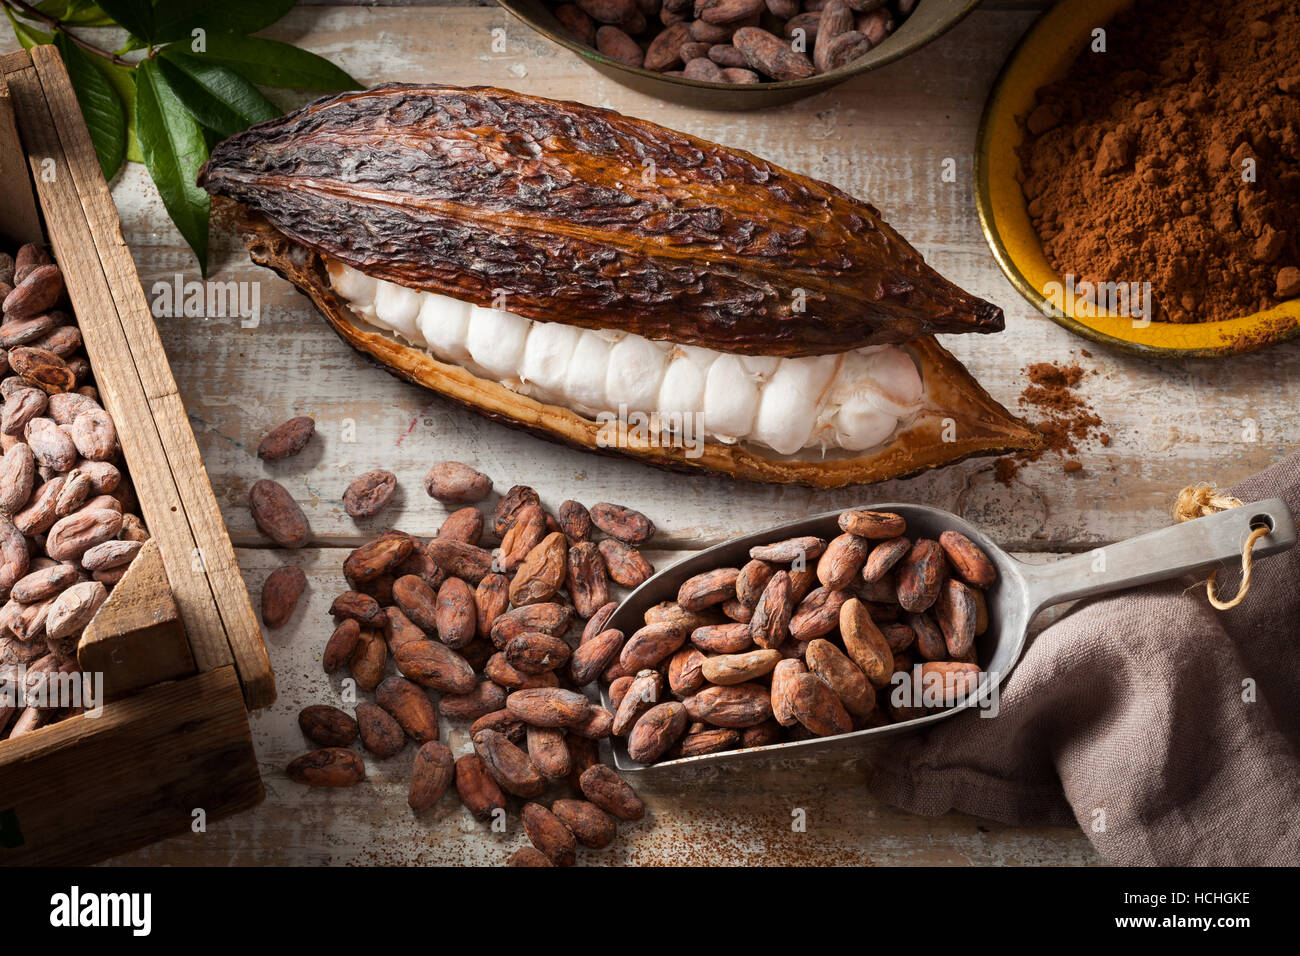 Cocoa beans and cocoa pod with cocoa powder on a wooden surface. Stock Photo